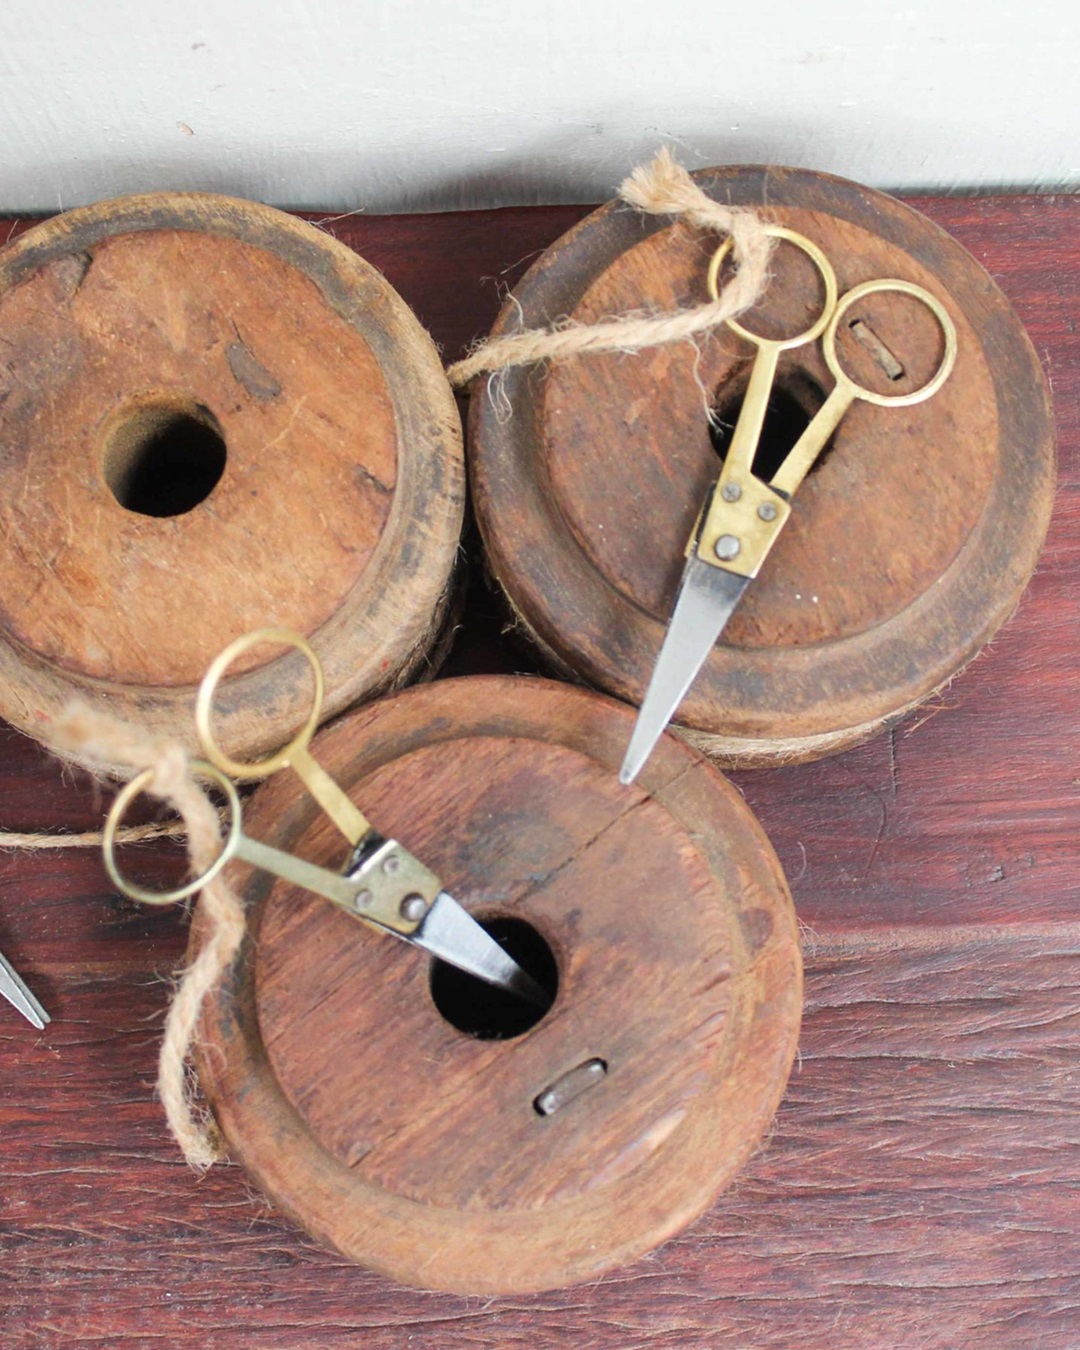 Vintage wooden bobbin with string and scissors